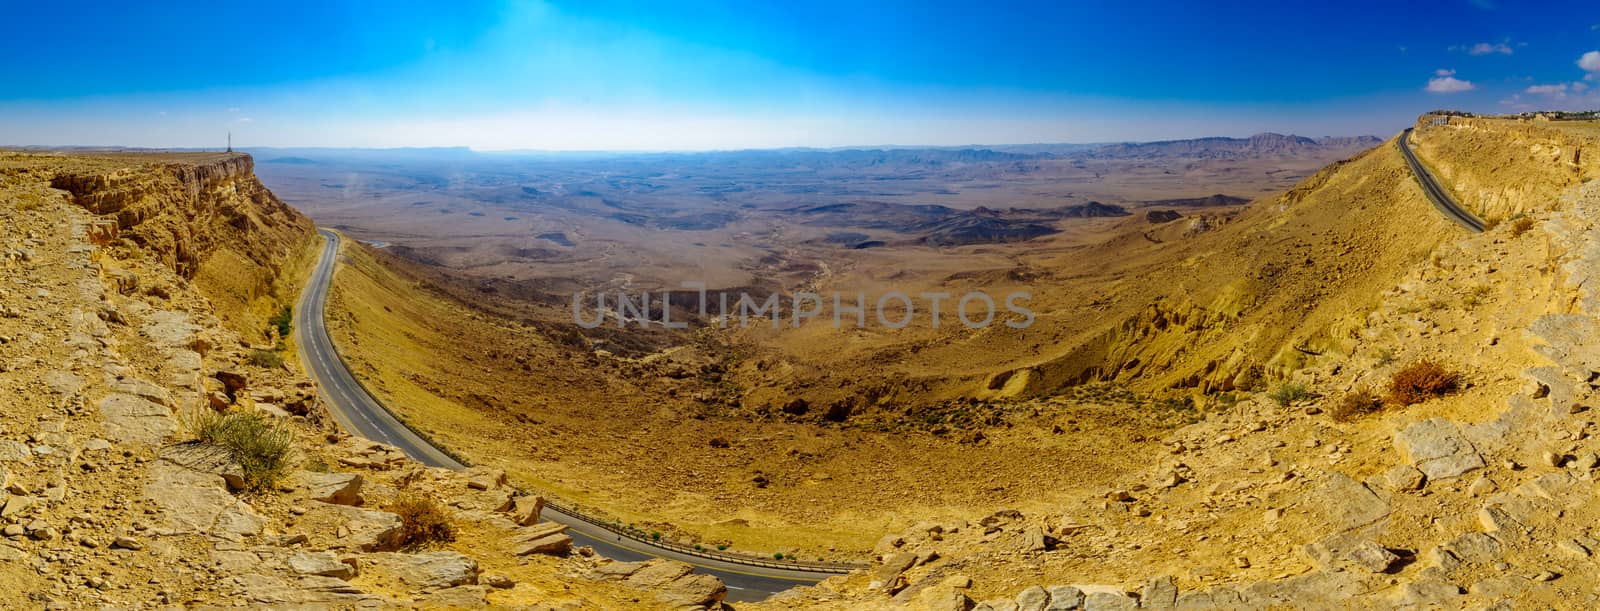 Panoramic view of cliffs, landscape, and road in Makhtesh (crater) Ramon, the Negev Desert, Southern Israel